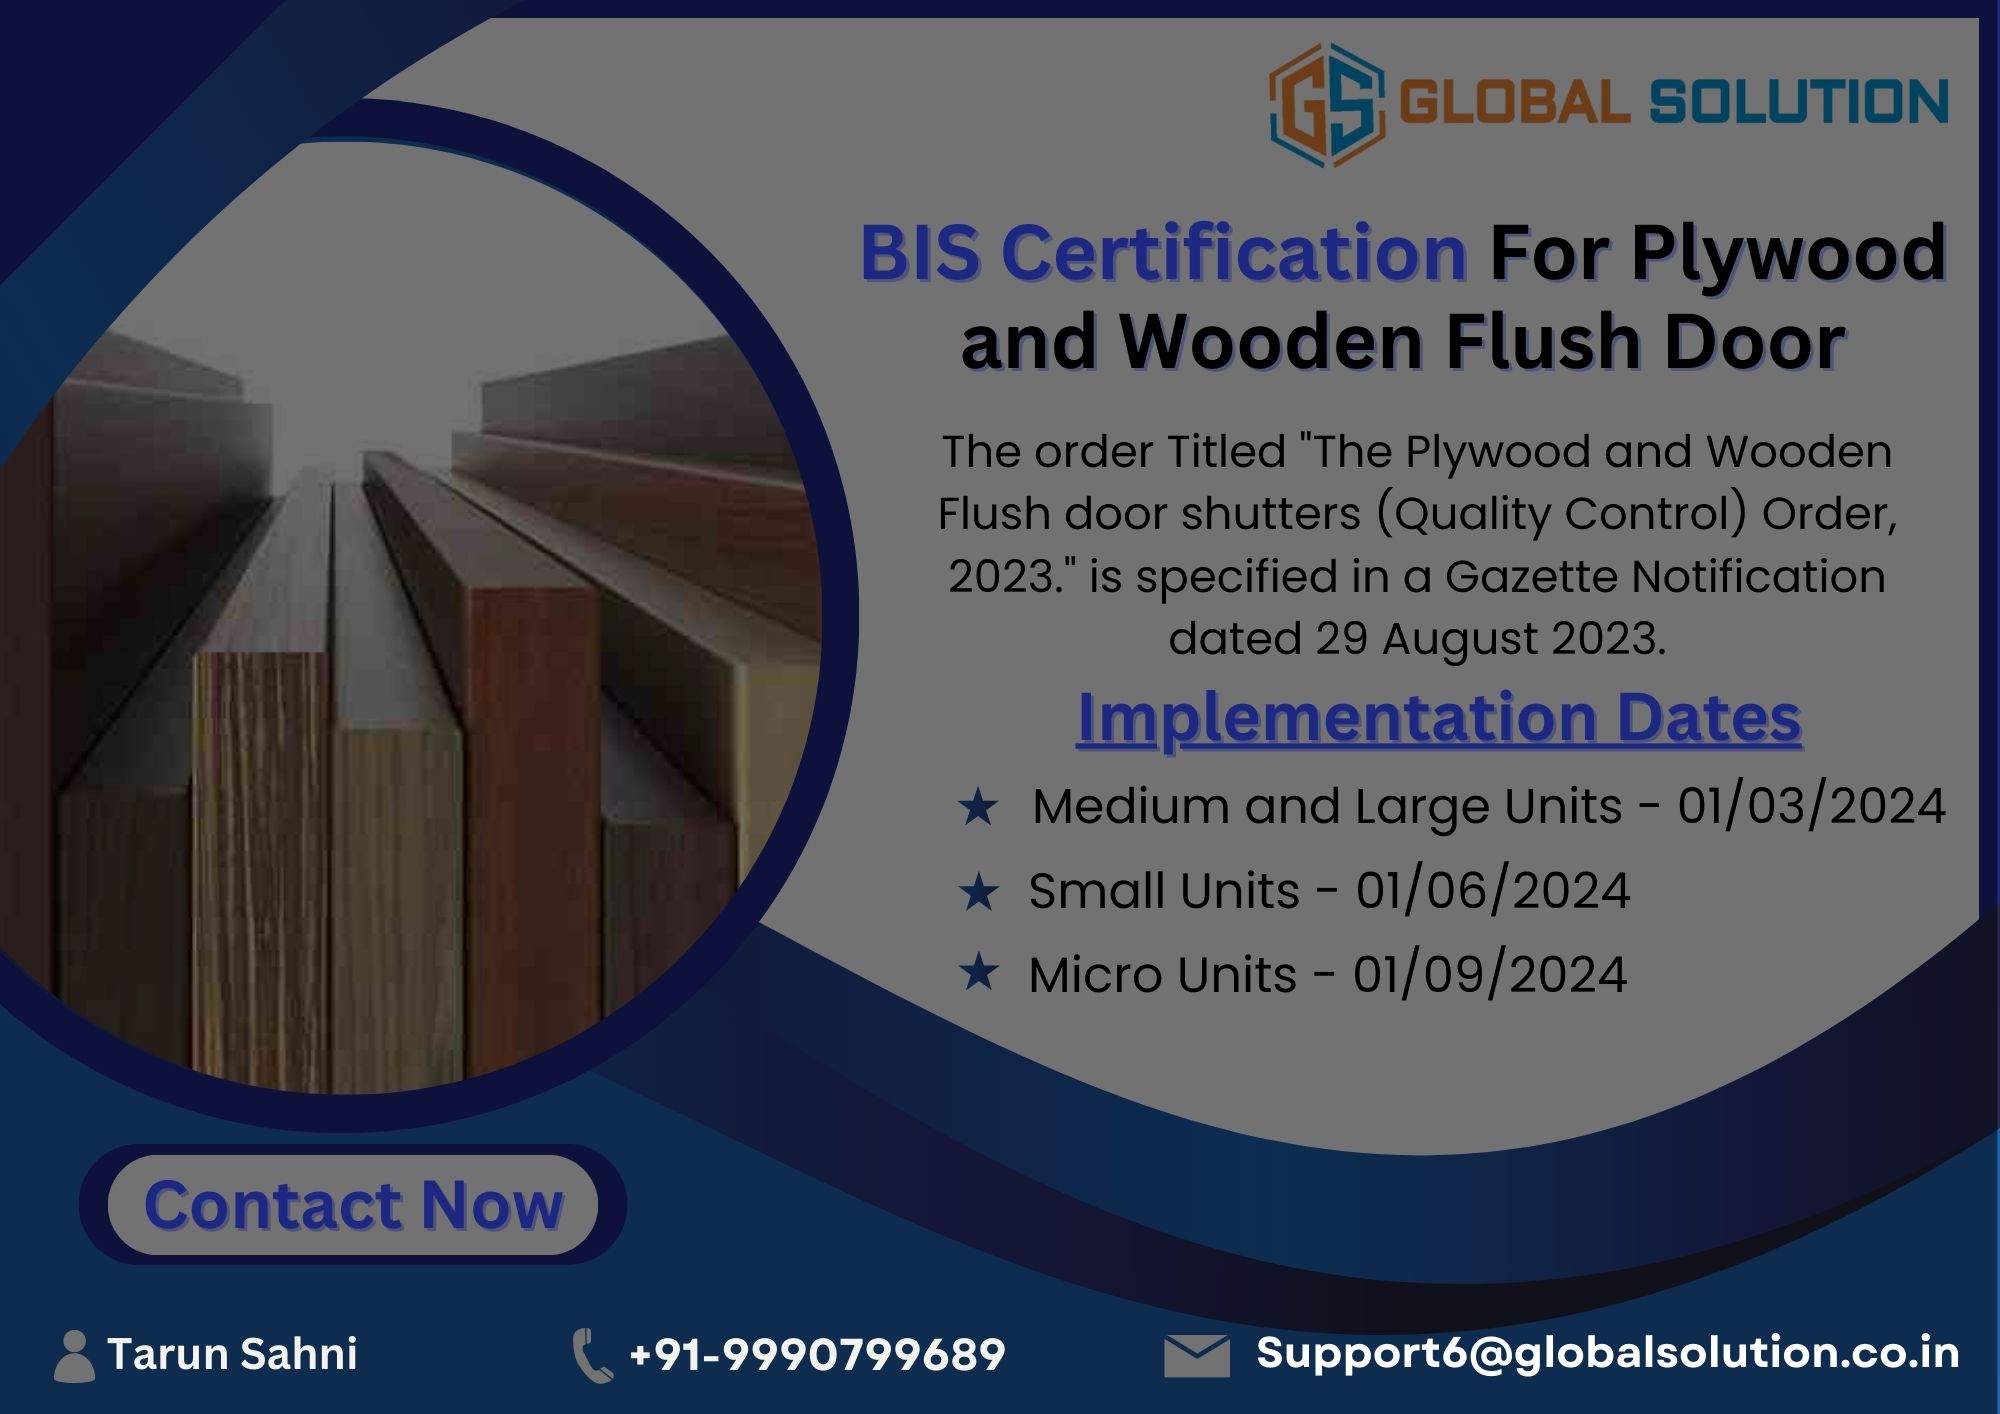 BIS Certification For Plywood and Wooden Flush Door